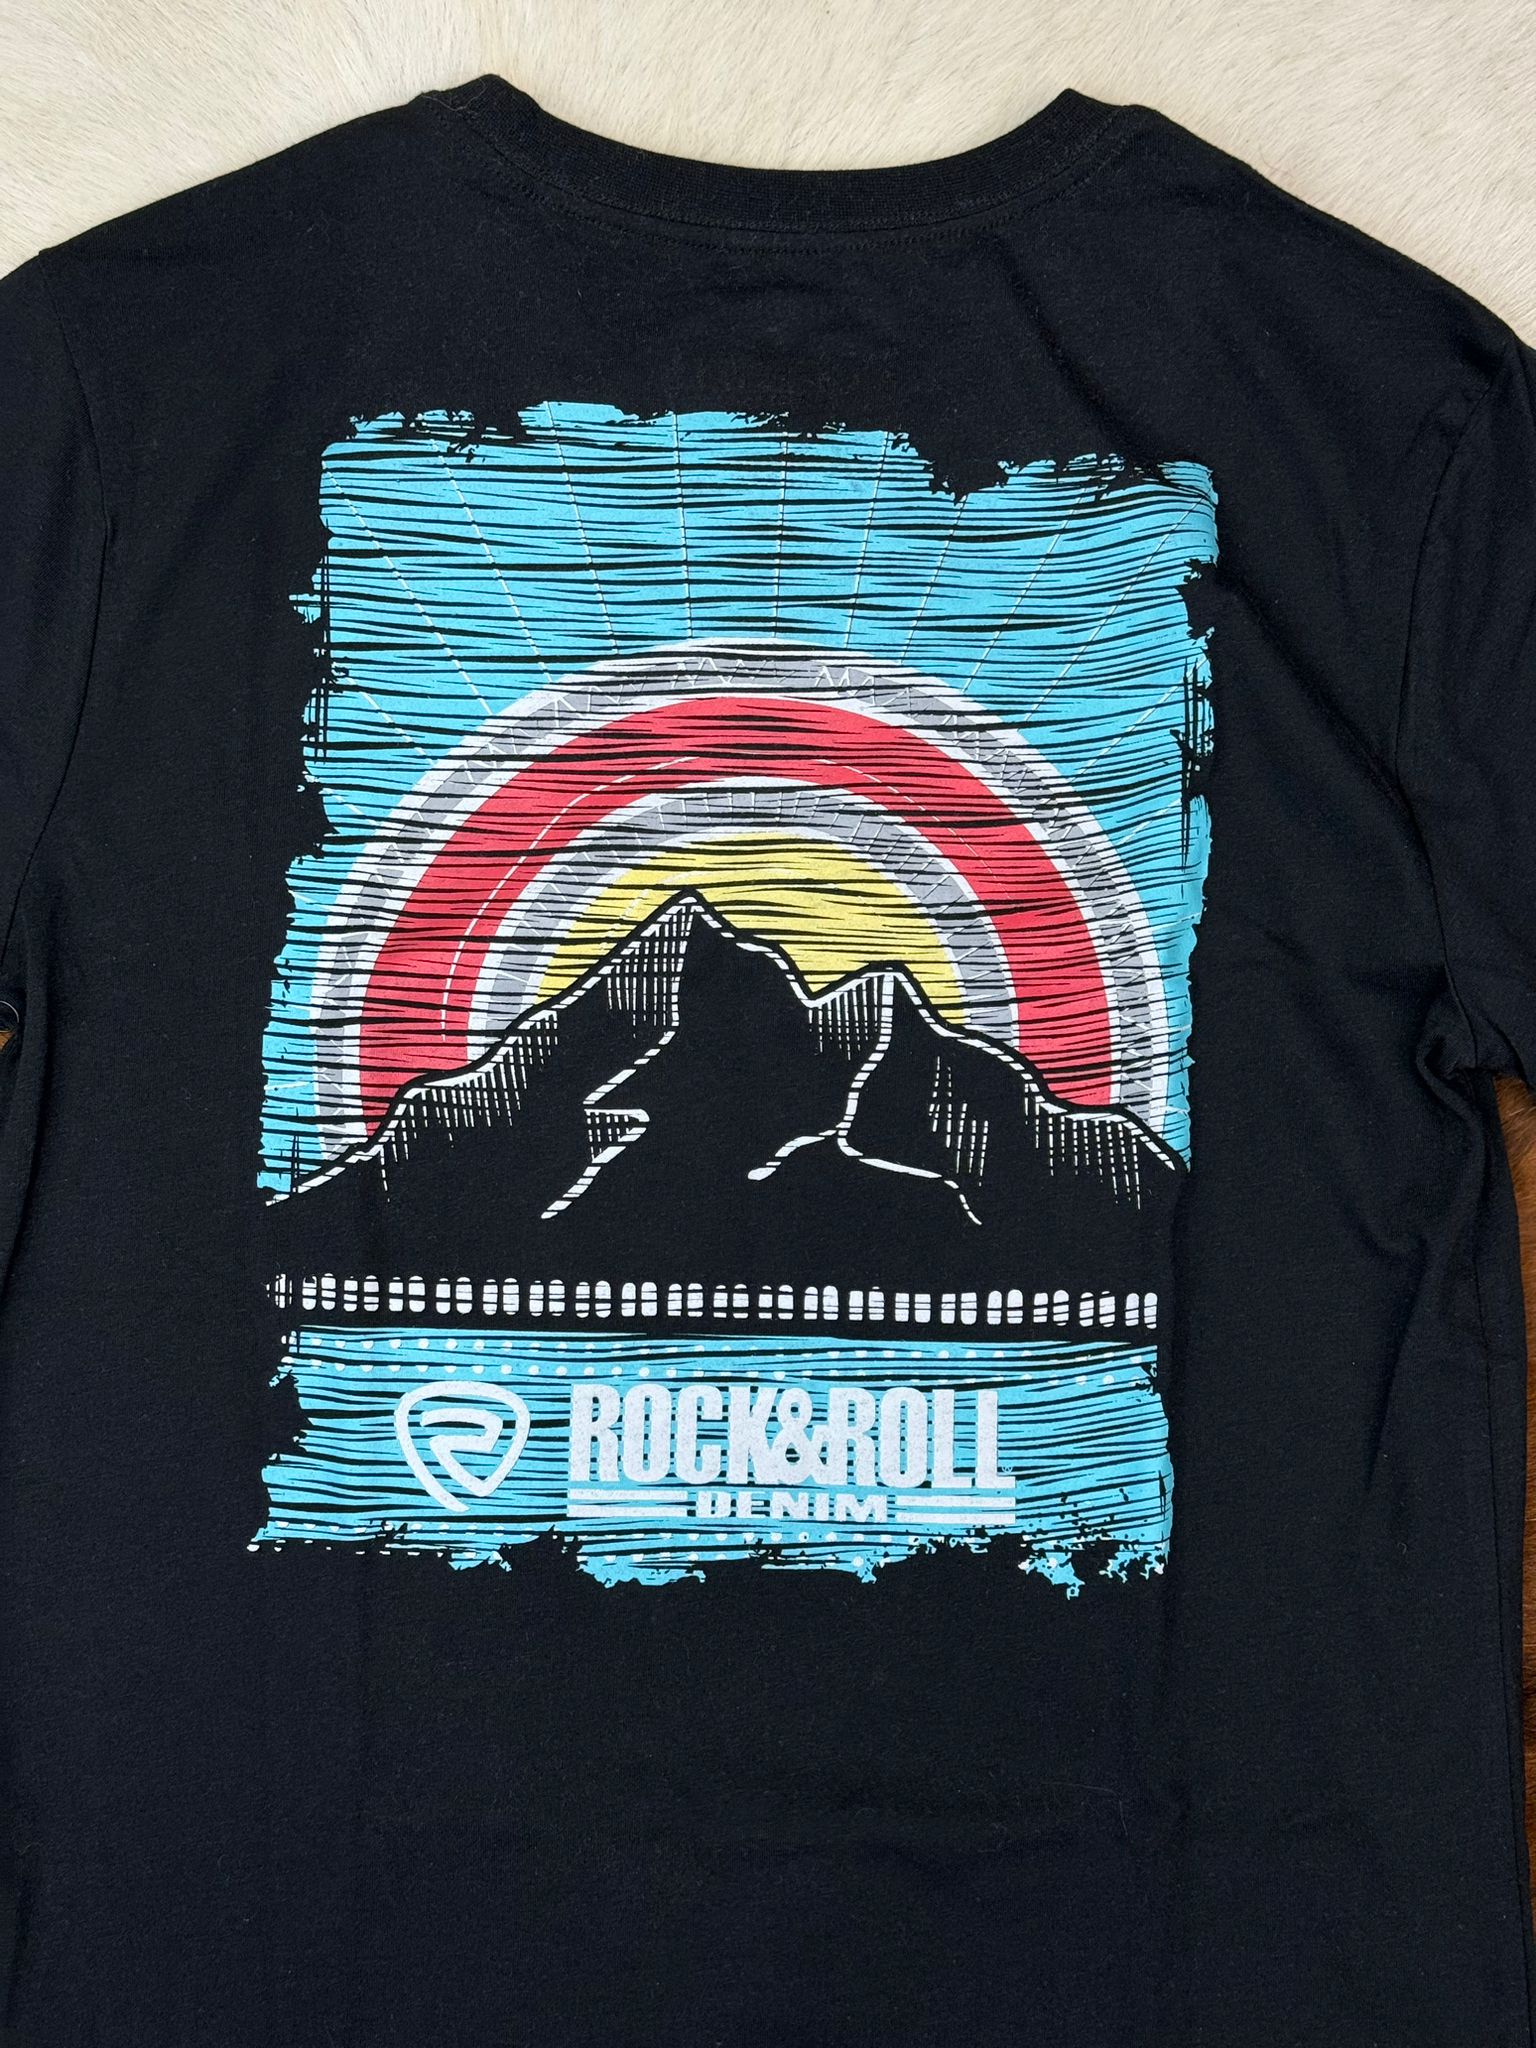 ROCK&ROLL GRAPHIC TEE MULTICOLOR MOUNTAIN BLACK SHORT SLEEVE T-SHIRT